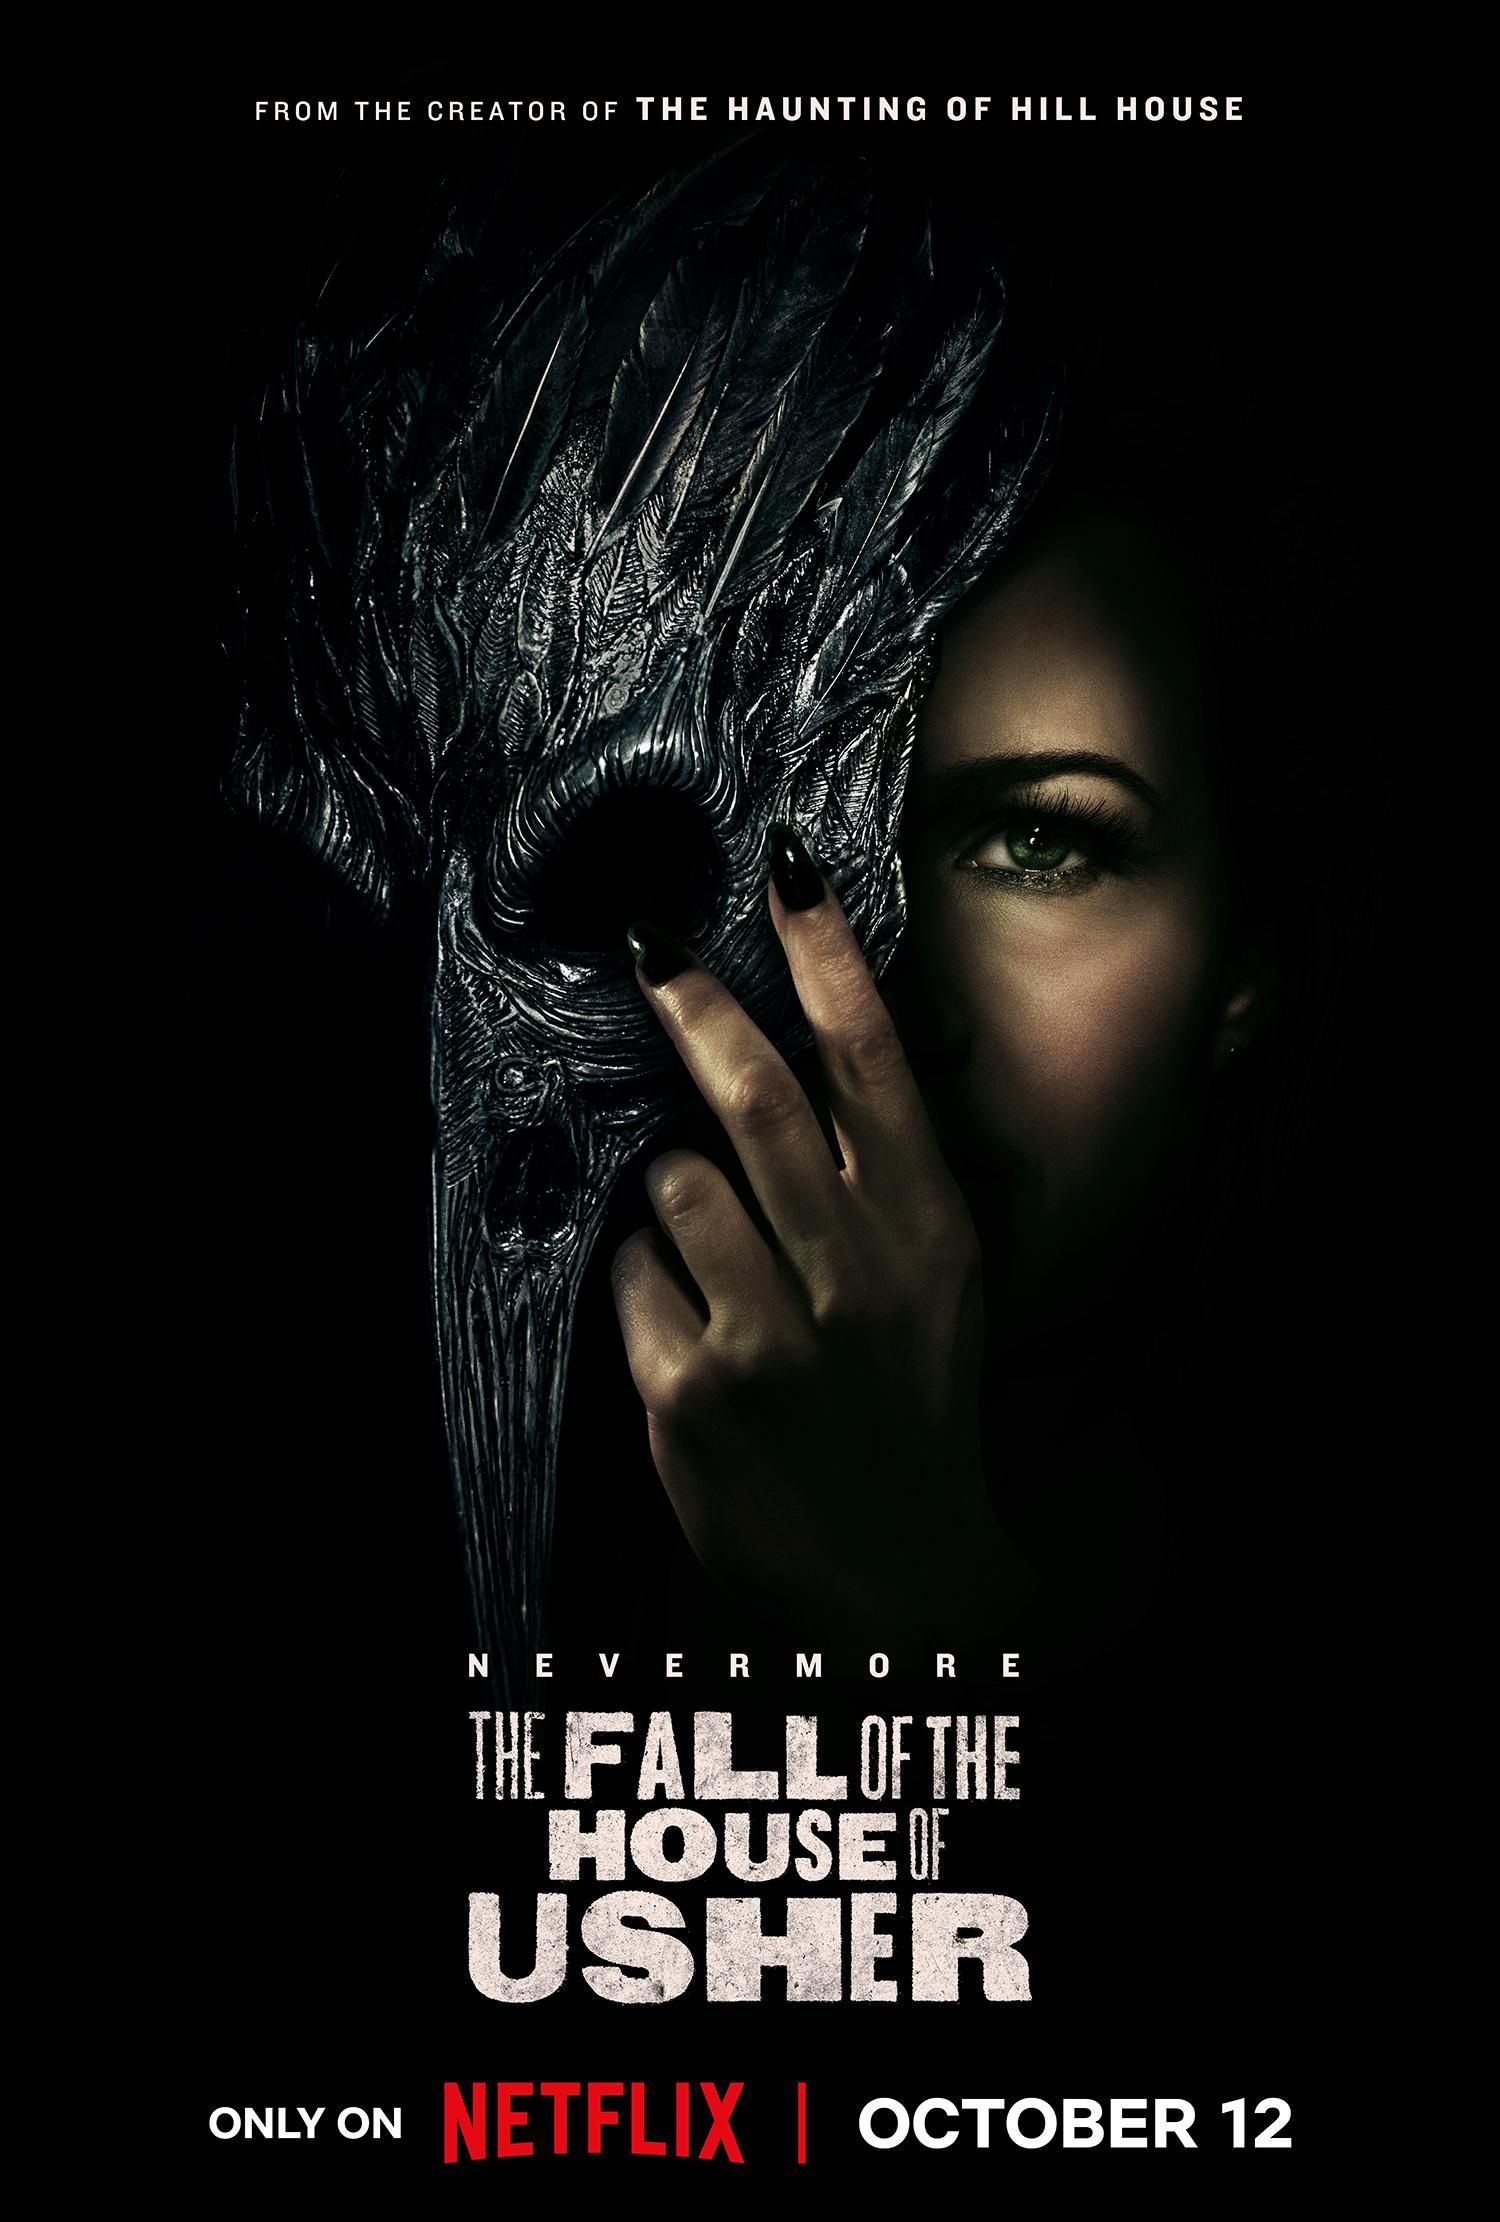 The Fall of the House of Usher Netflix Poster